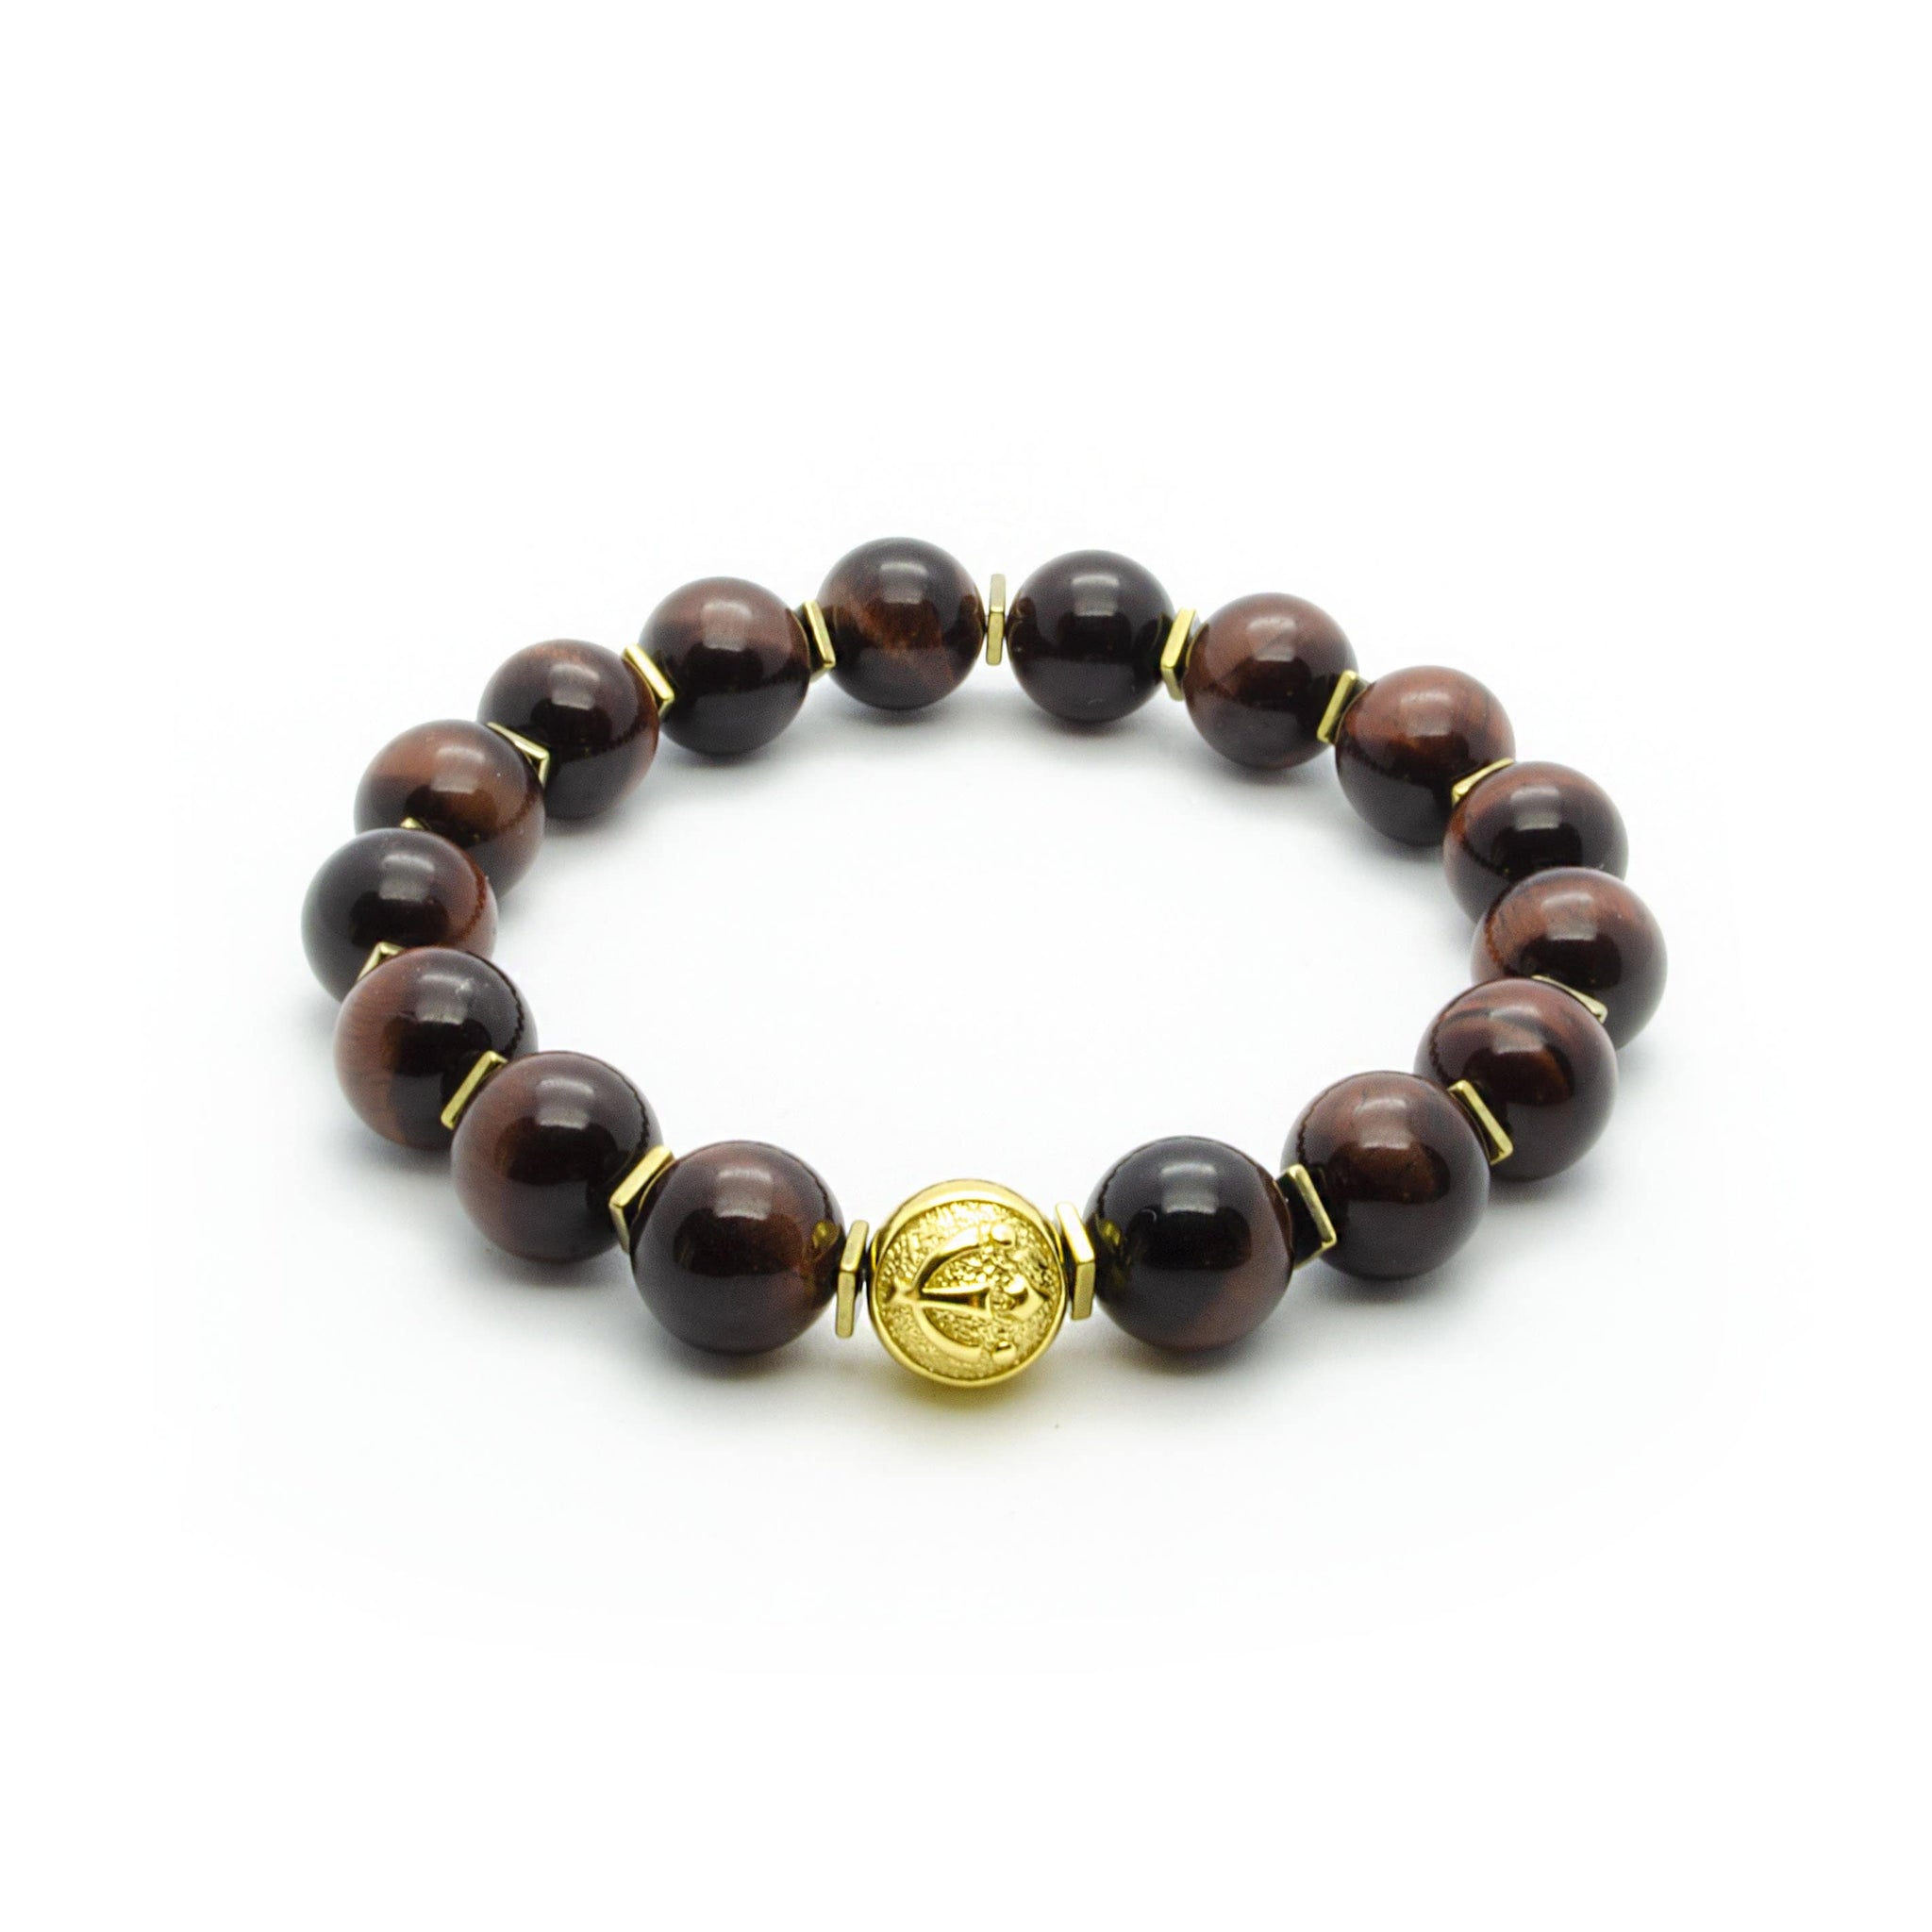 Elastic Bracelet With Natural Stones Red Tiger Eye Stone 